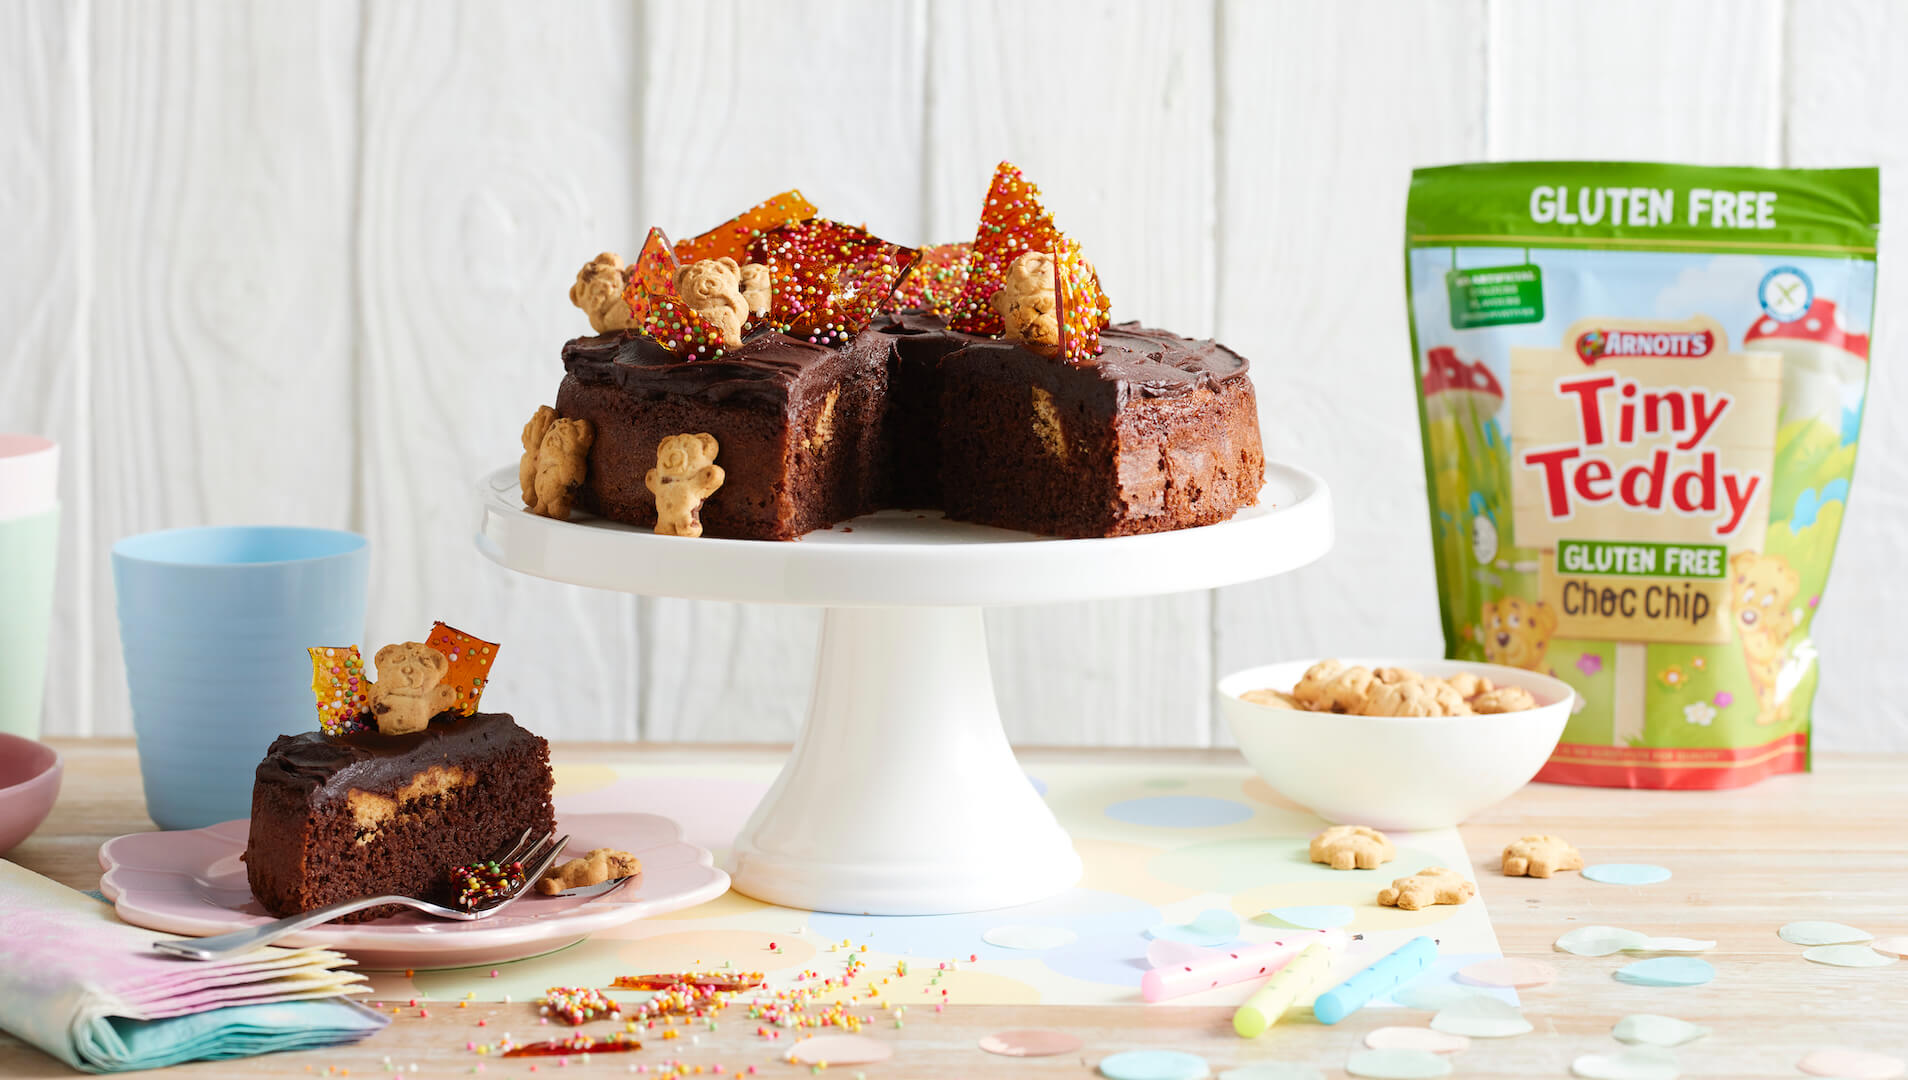 This Tiny Teddys chocolate birthday cake is quick, easy and a sure hit for a party.